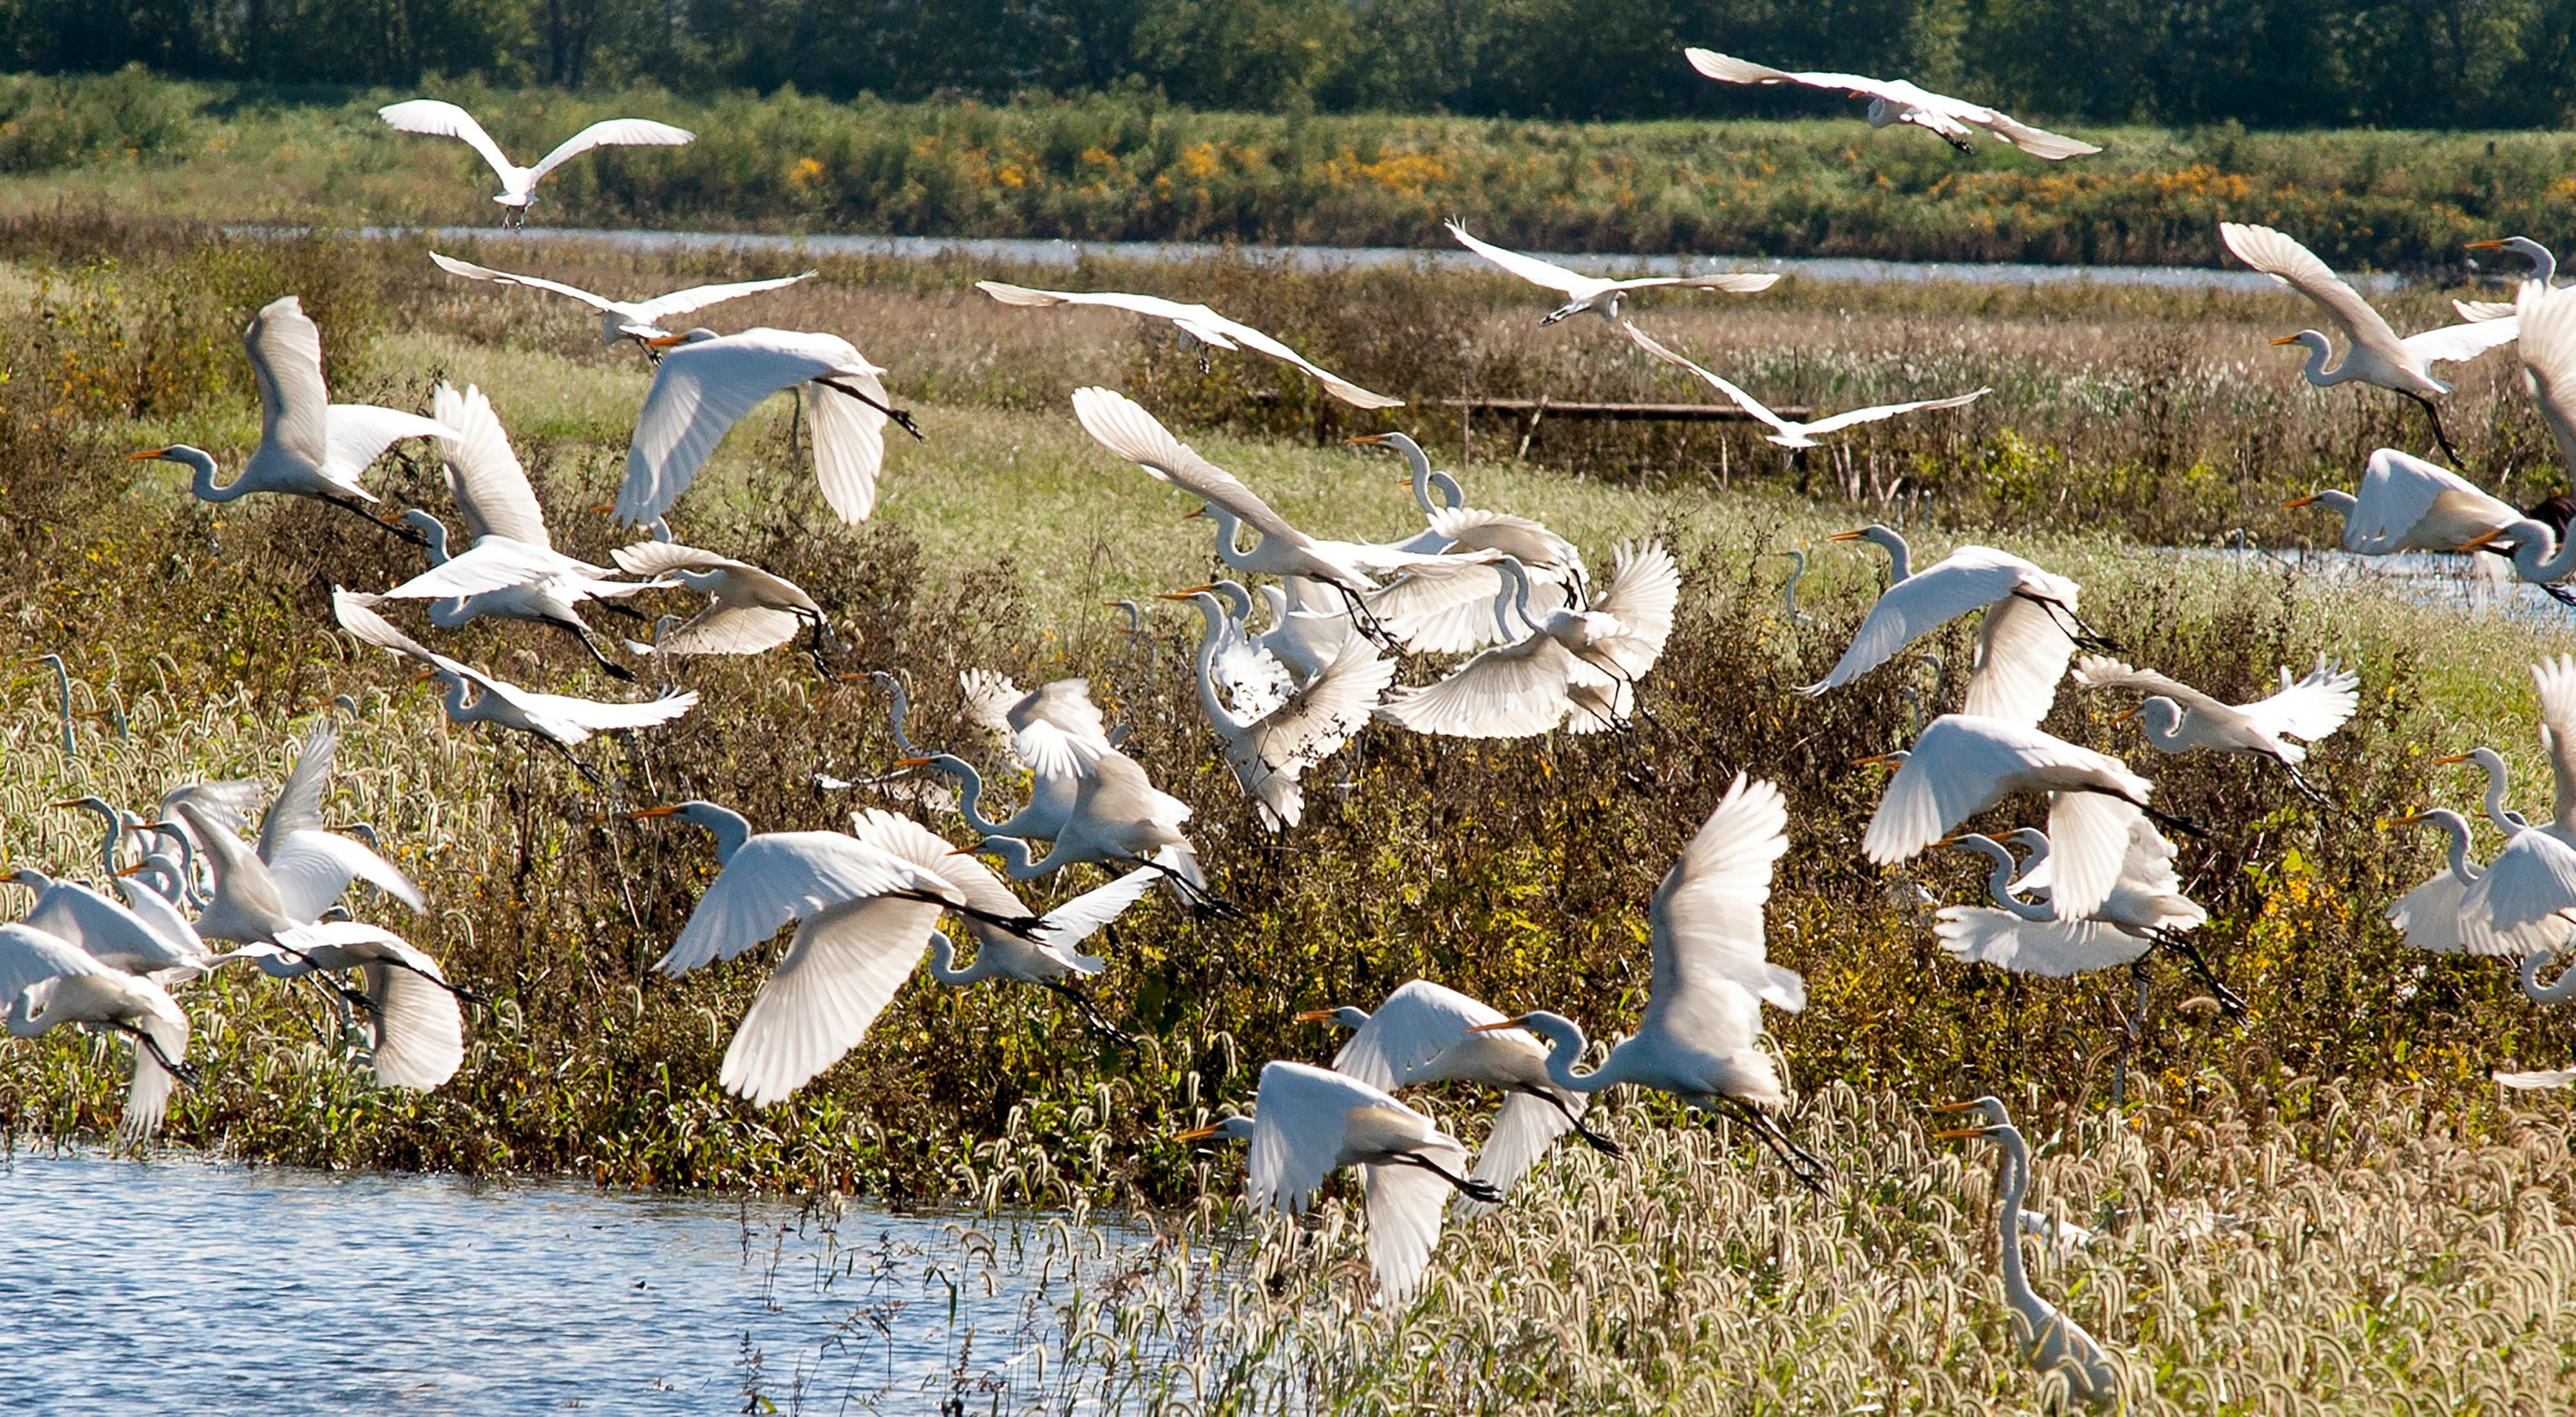 A large flock of white waterbirds takes off in flight over a marshland.